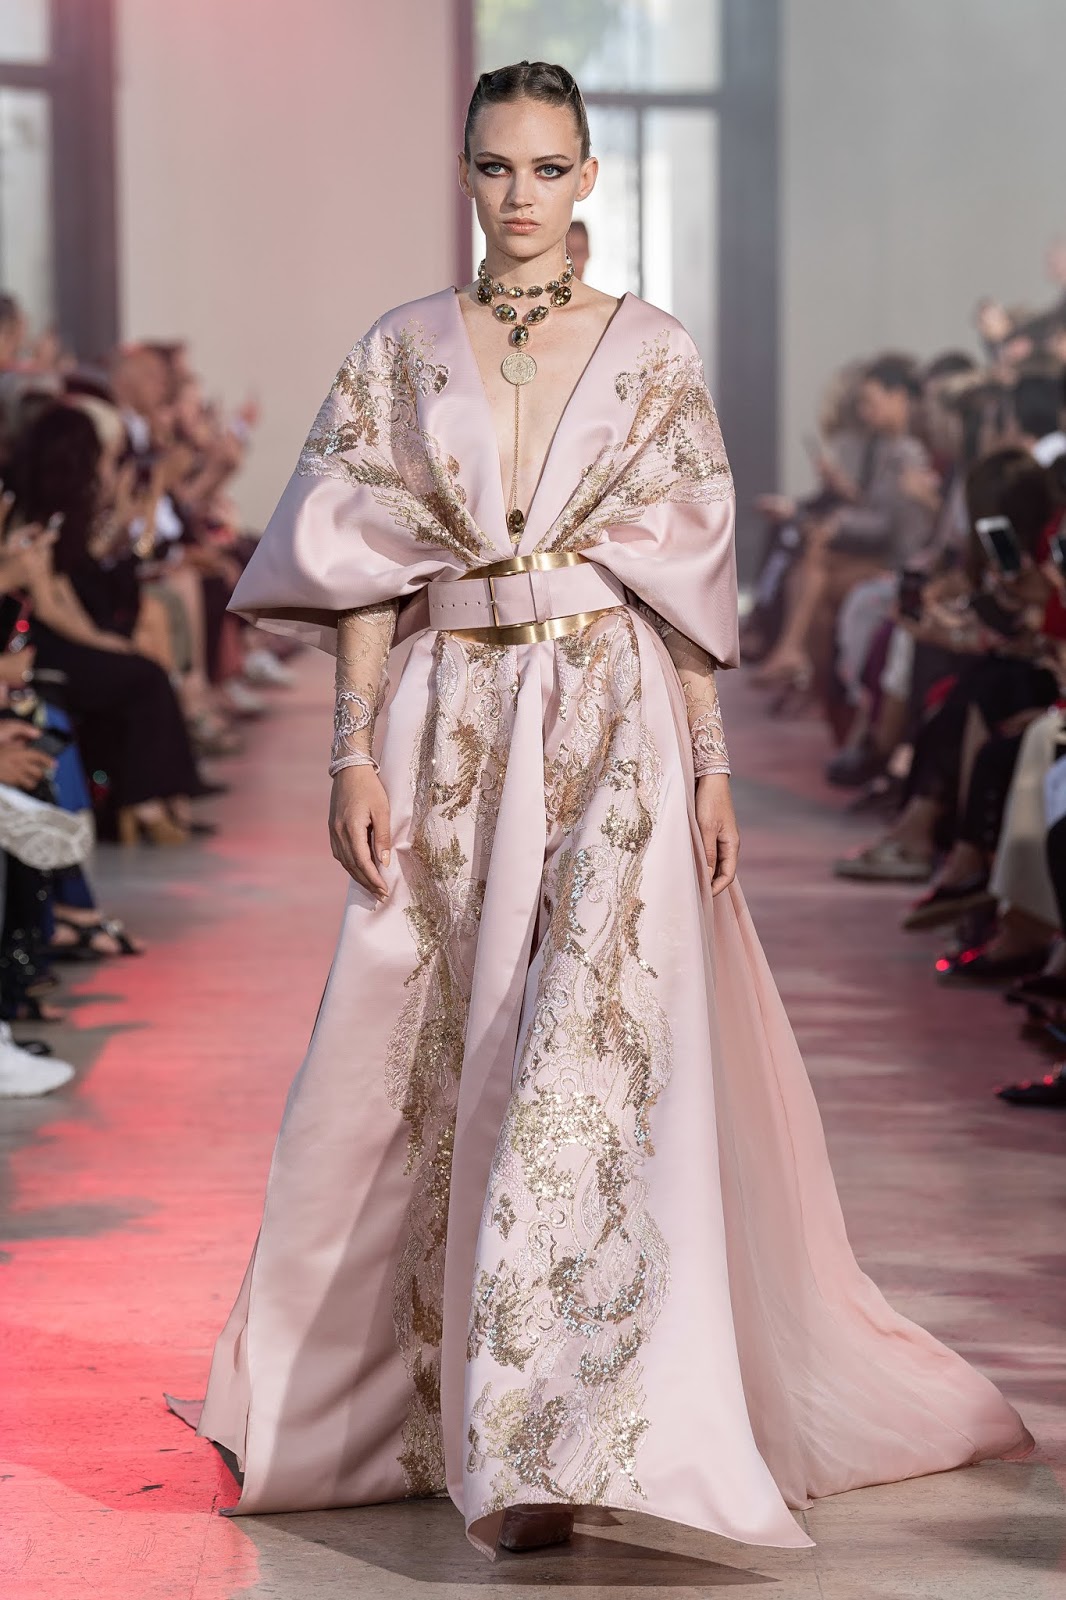 Couture Gorgeous: ELIE SAAB July 11, 2019 | ZsaZsa Bellagio - Like No Other